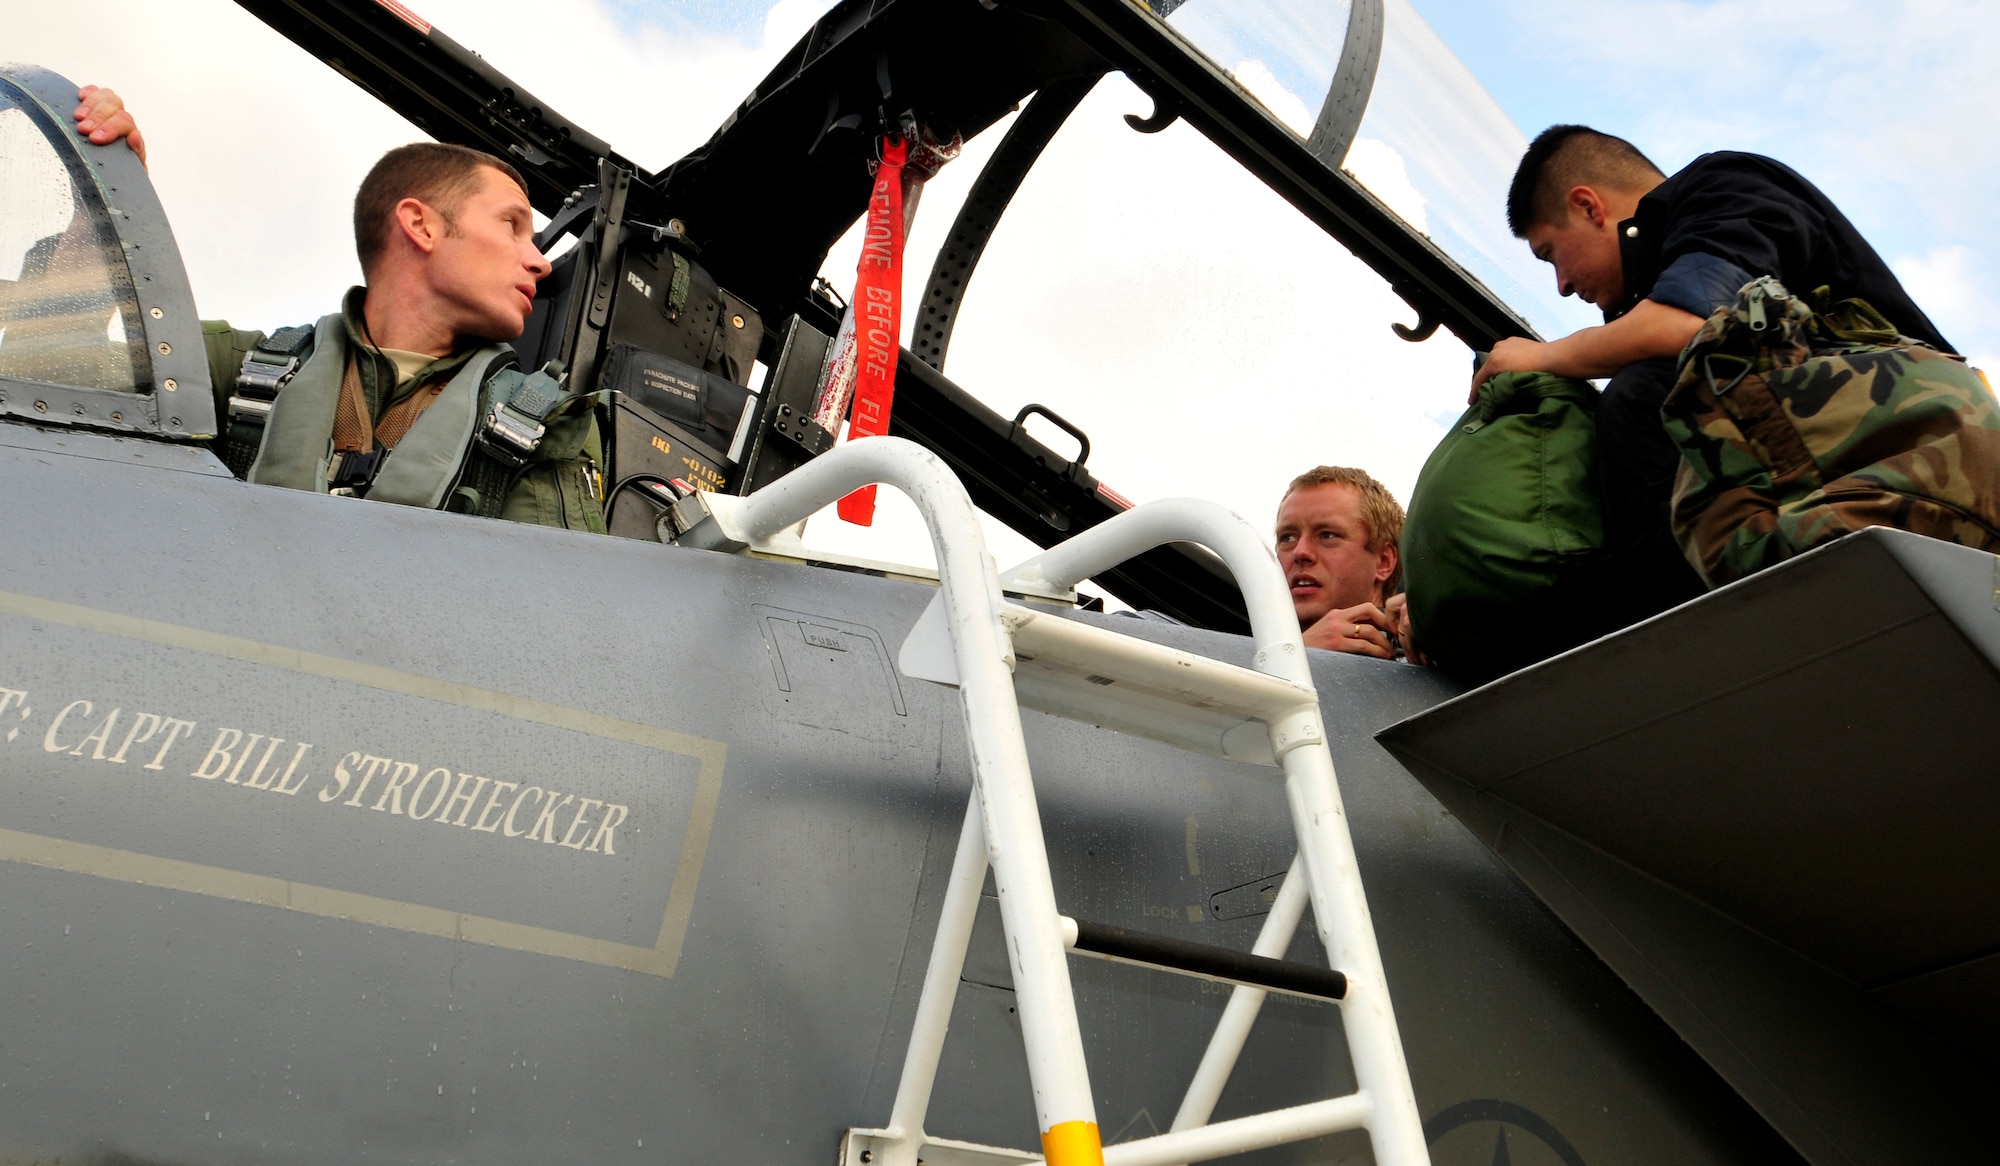 ROYAL AIR FORCE LAKENHEATH, England - (left to right) U.S. Air Force Maj. Mike Conrad, 493rd Fighter Squadron pilot, and Swedish Air Force Capt. Fredrik Bergstrom, 211th Fighter Squadron, go over preparations before take-off as Senior Airman Francisco Lumbreras, 748th Aircraft Maintenance Squadron assistant dedicated crew chief assists Bergstrom with gear Nov. 17, 2011. This is Bergstrom's first time ever in a foreign aircraft. Members from the SAF and the 48th Fighter Wing trained together to increase their interoperability and gather experience with foreign aircraft. (U.S. Air Force photo by Senior Airman Tiffany M. Deuel)